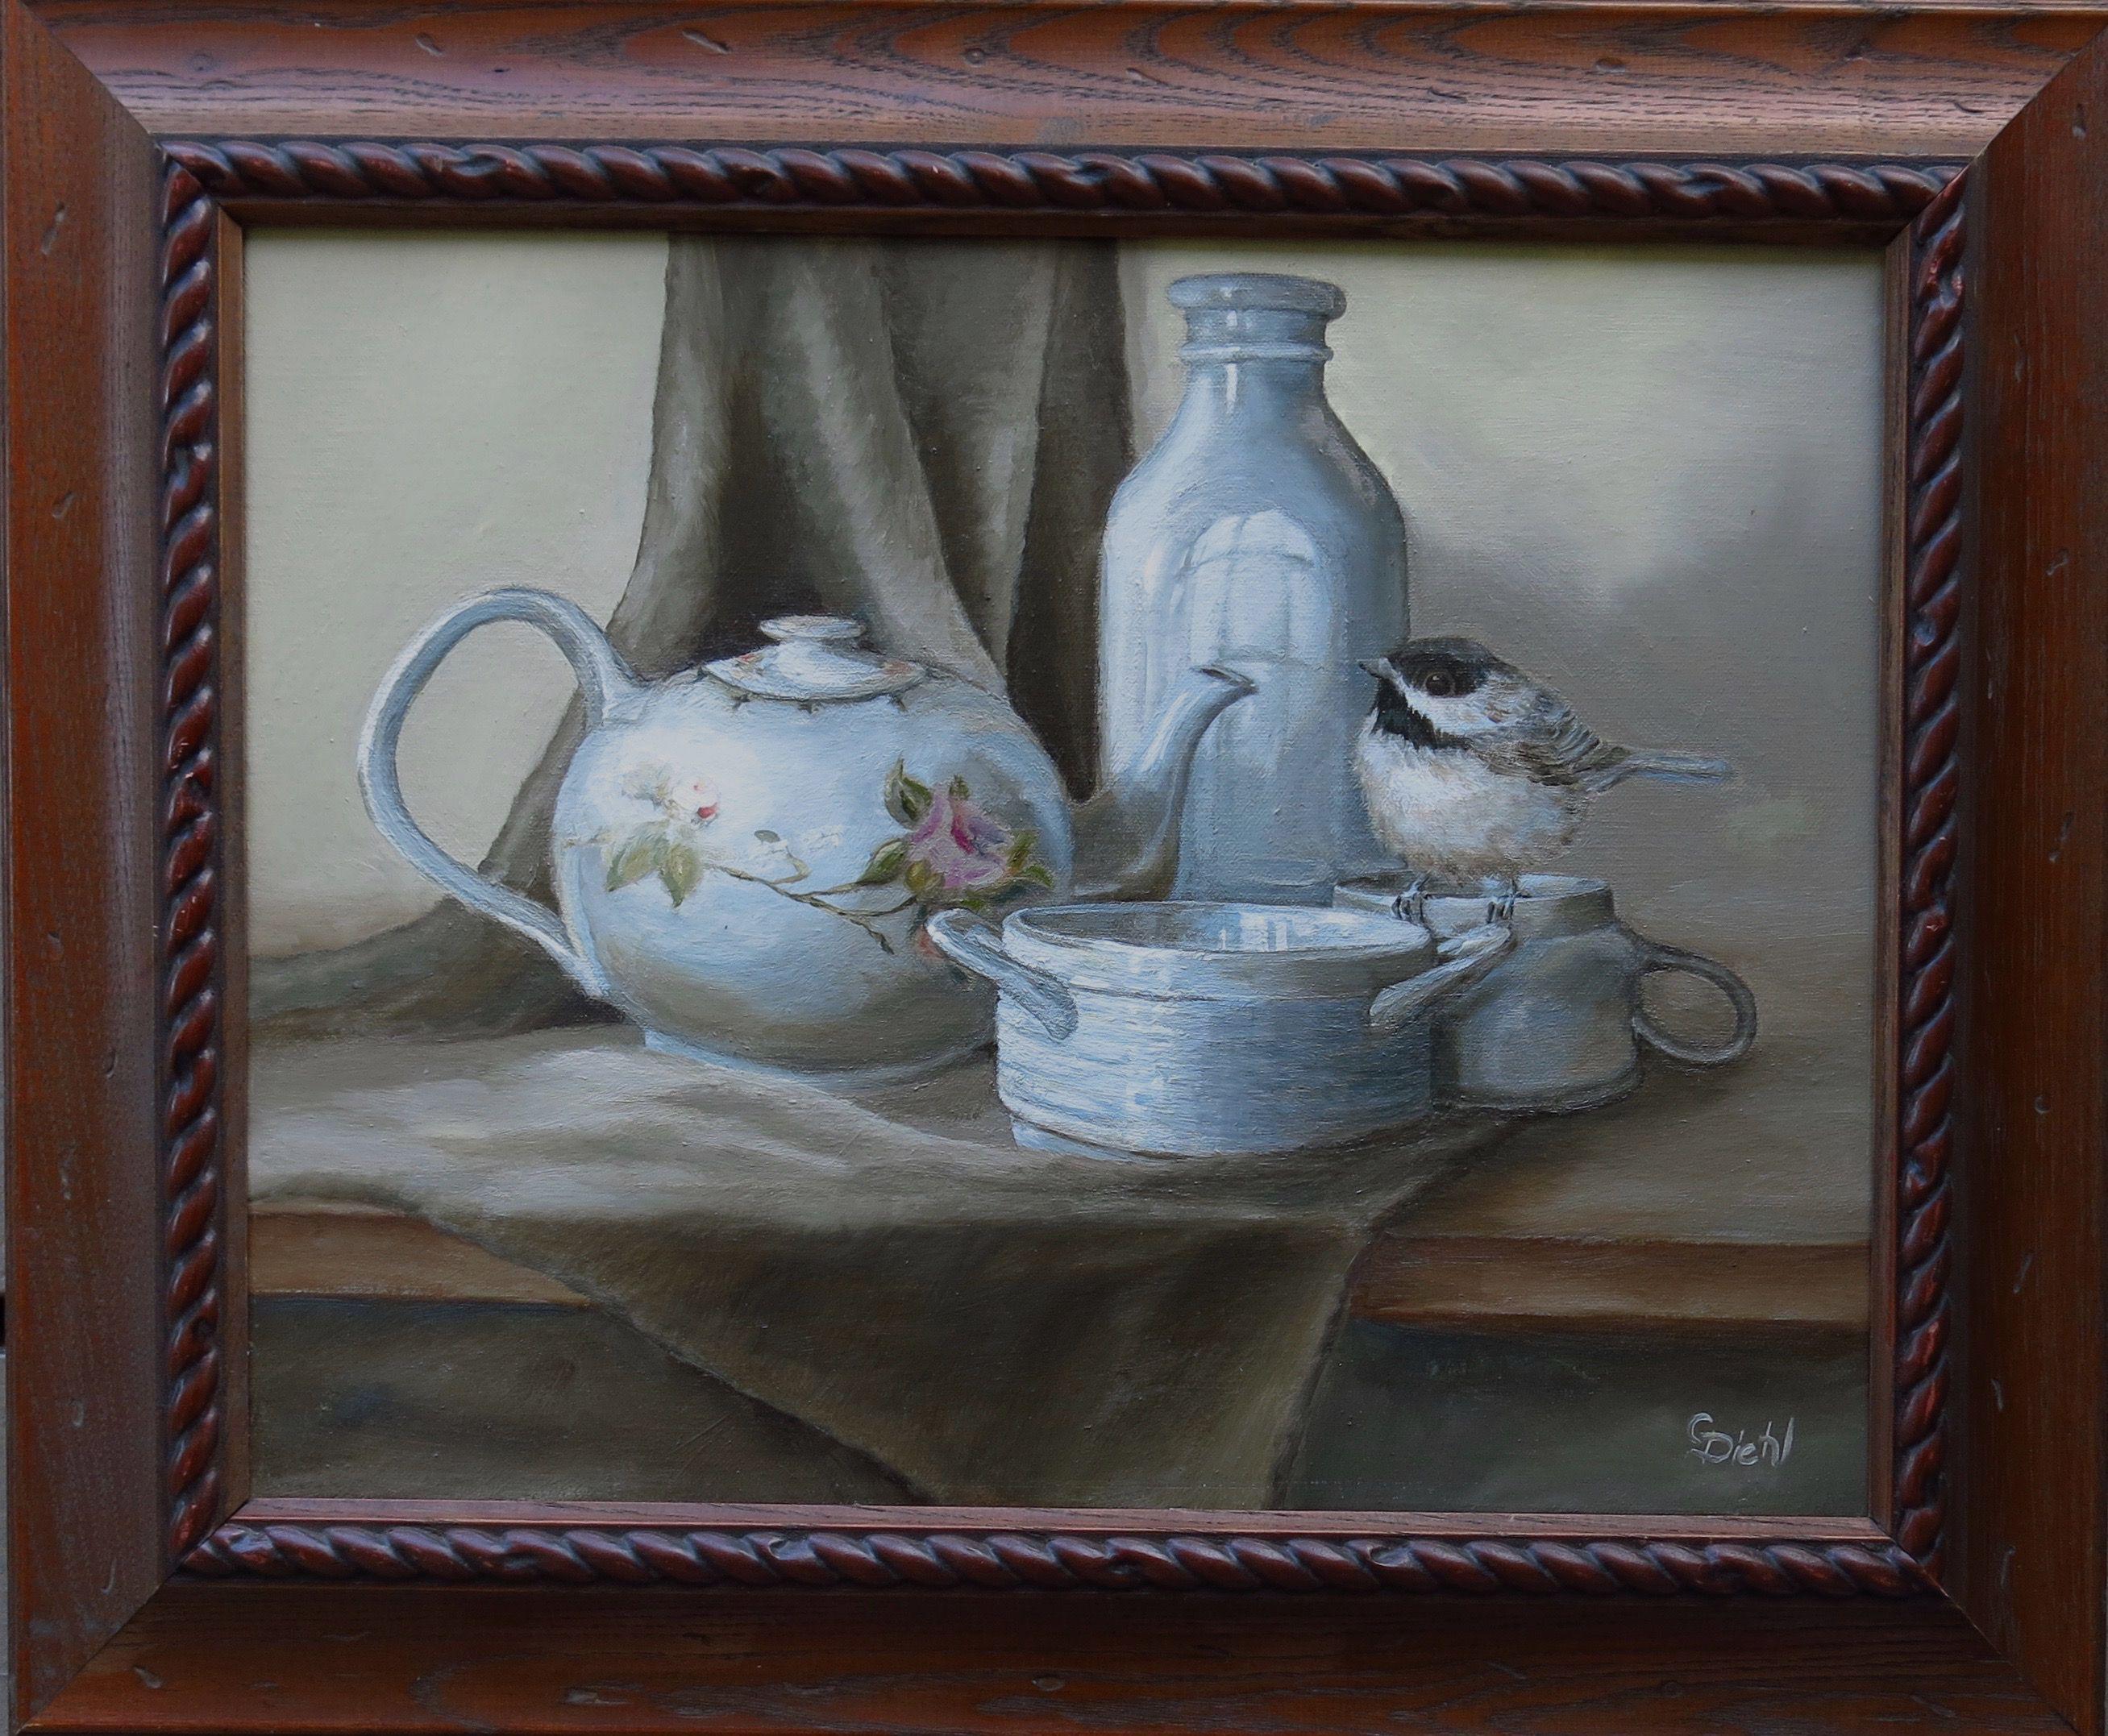 A collection of white ceramic objects fill this original still life painting. A little chickadee bird is shown standing on an inverted tea cup. This fine art was created in oils on a 11